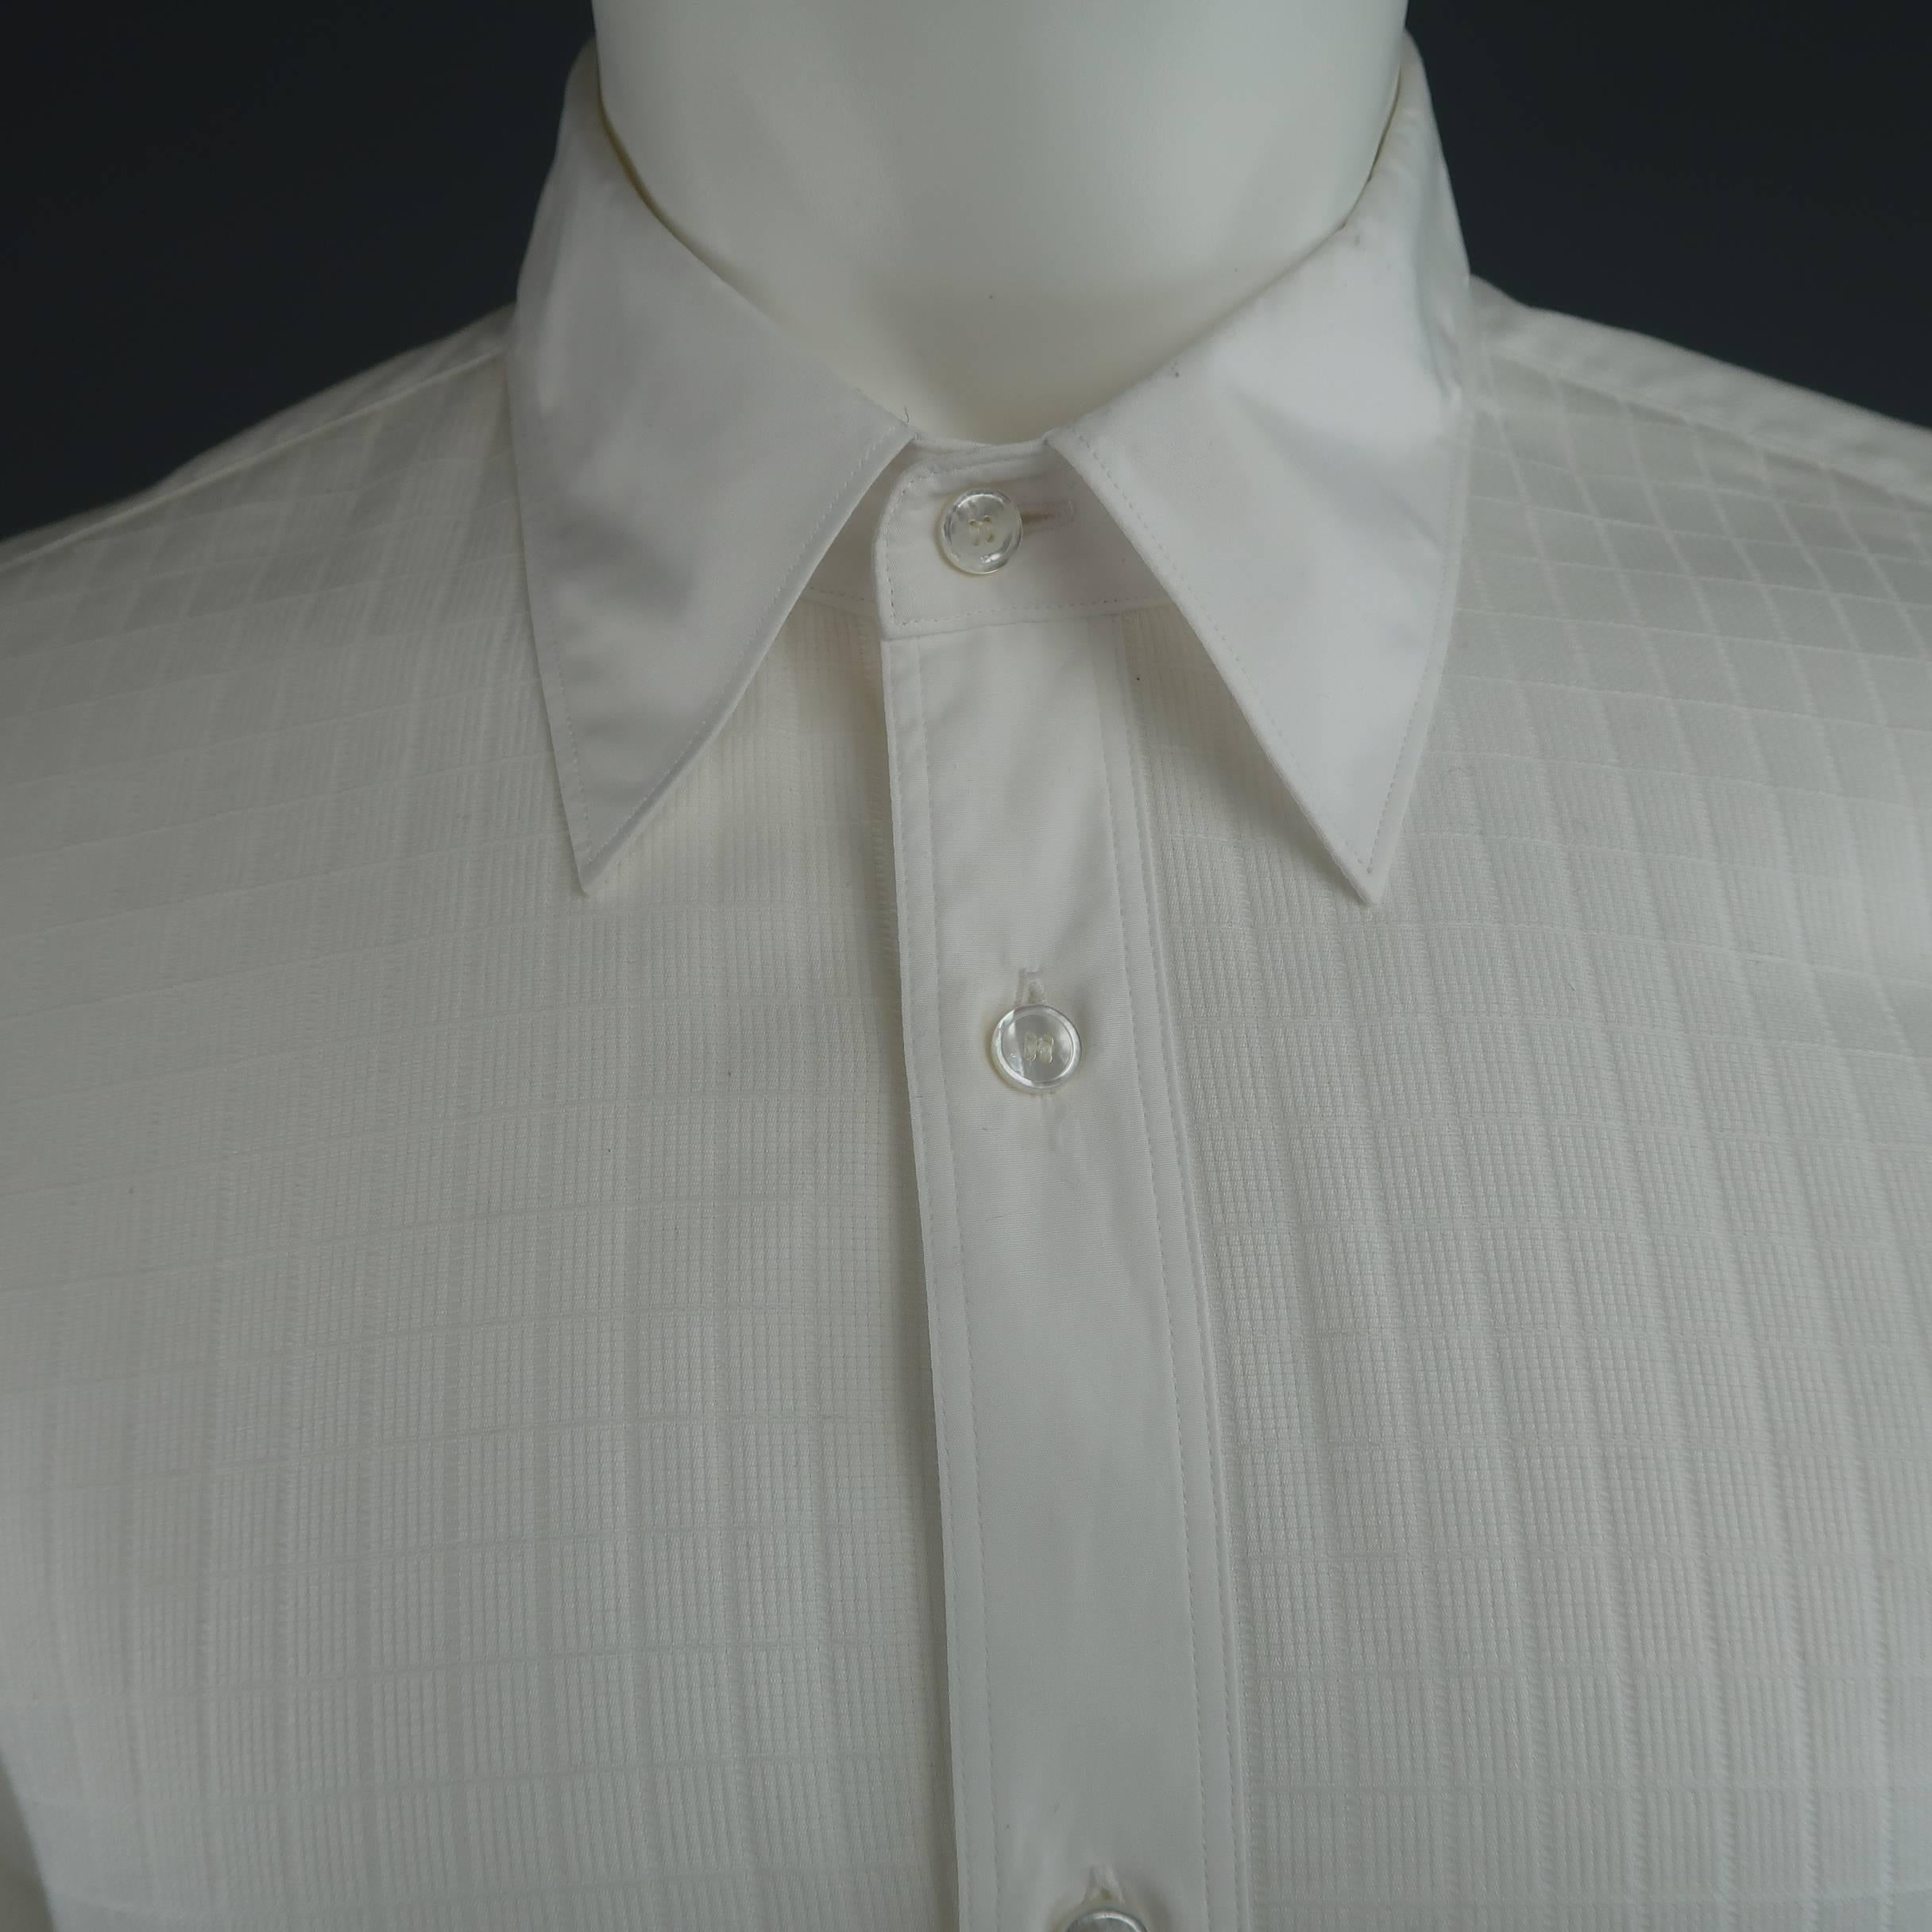 JUNYA WATENABE MAN COMMES des GARCONS shirt comes in a grid textured white cotton and features a smooth pointed collar and frontal placket with tab. Made in Japan.
 
Excellent Pre-Owned Condition.
Marked: XL
 
Measurements:
 
Shoulder: 18 in.
Chest: